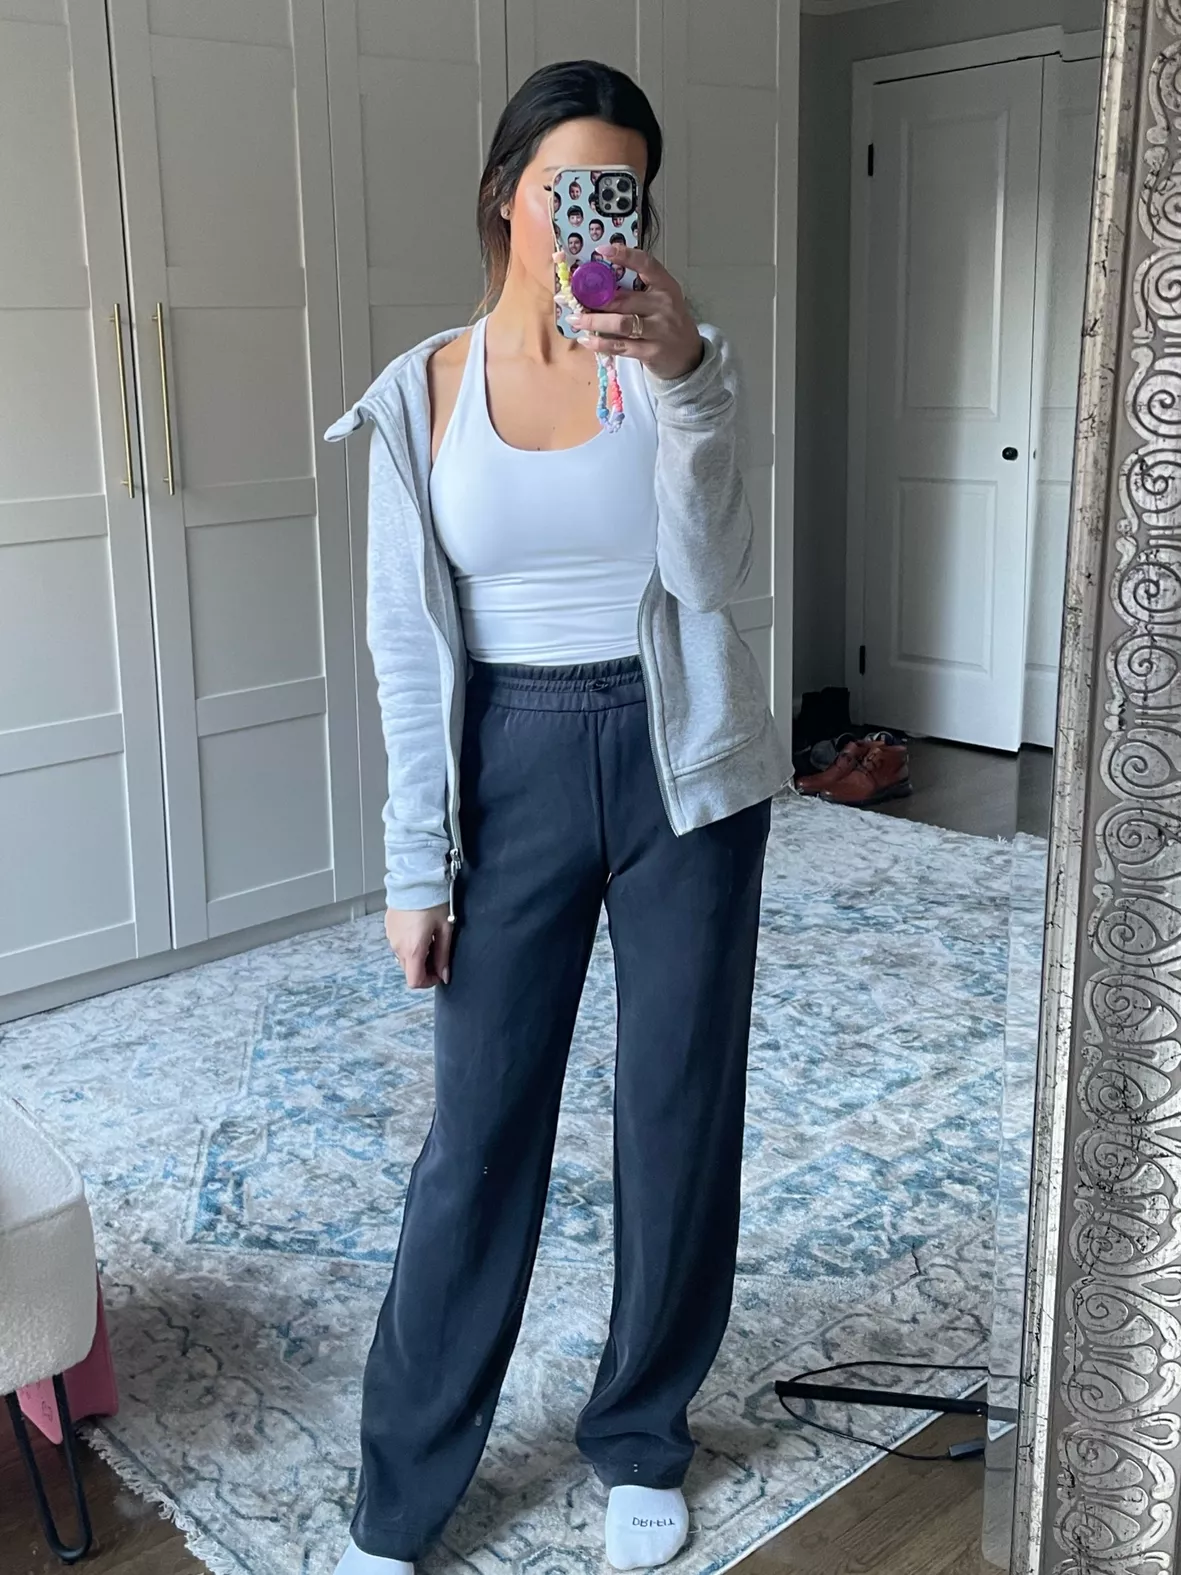 How to Style The Lululemon Softstreme High Rise Pant Full Length